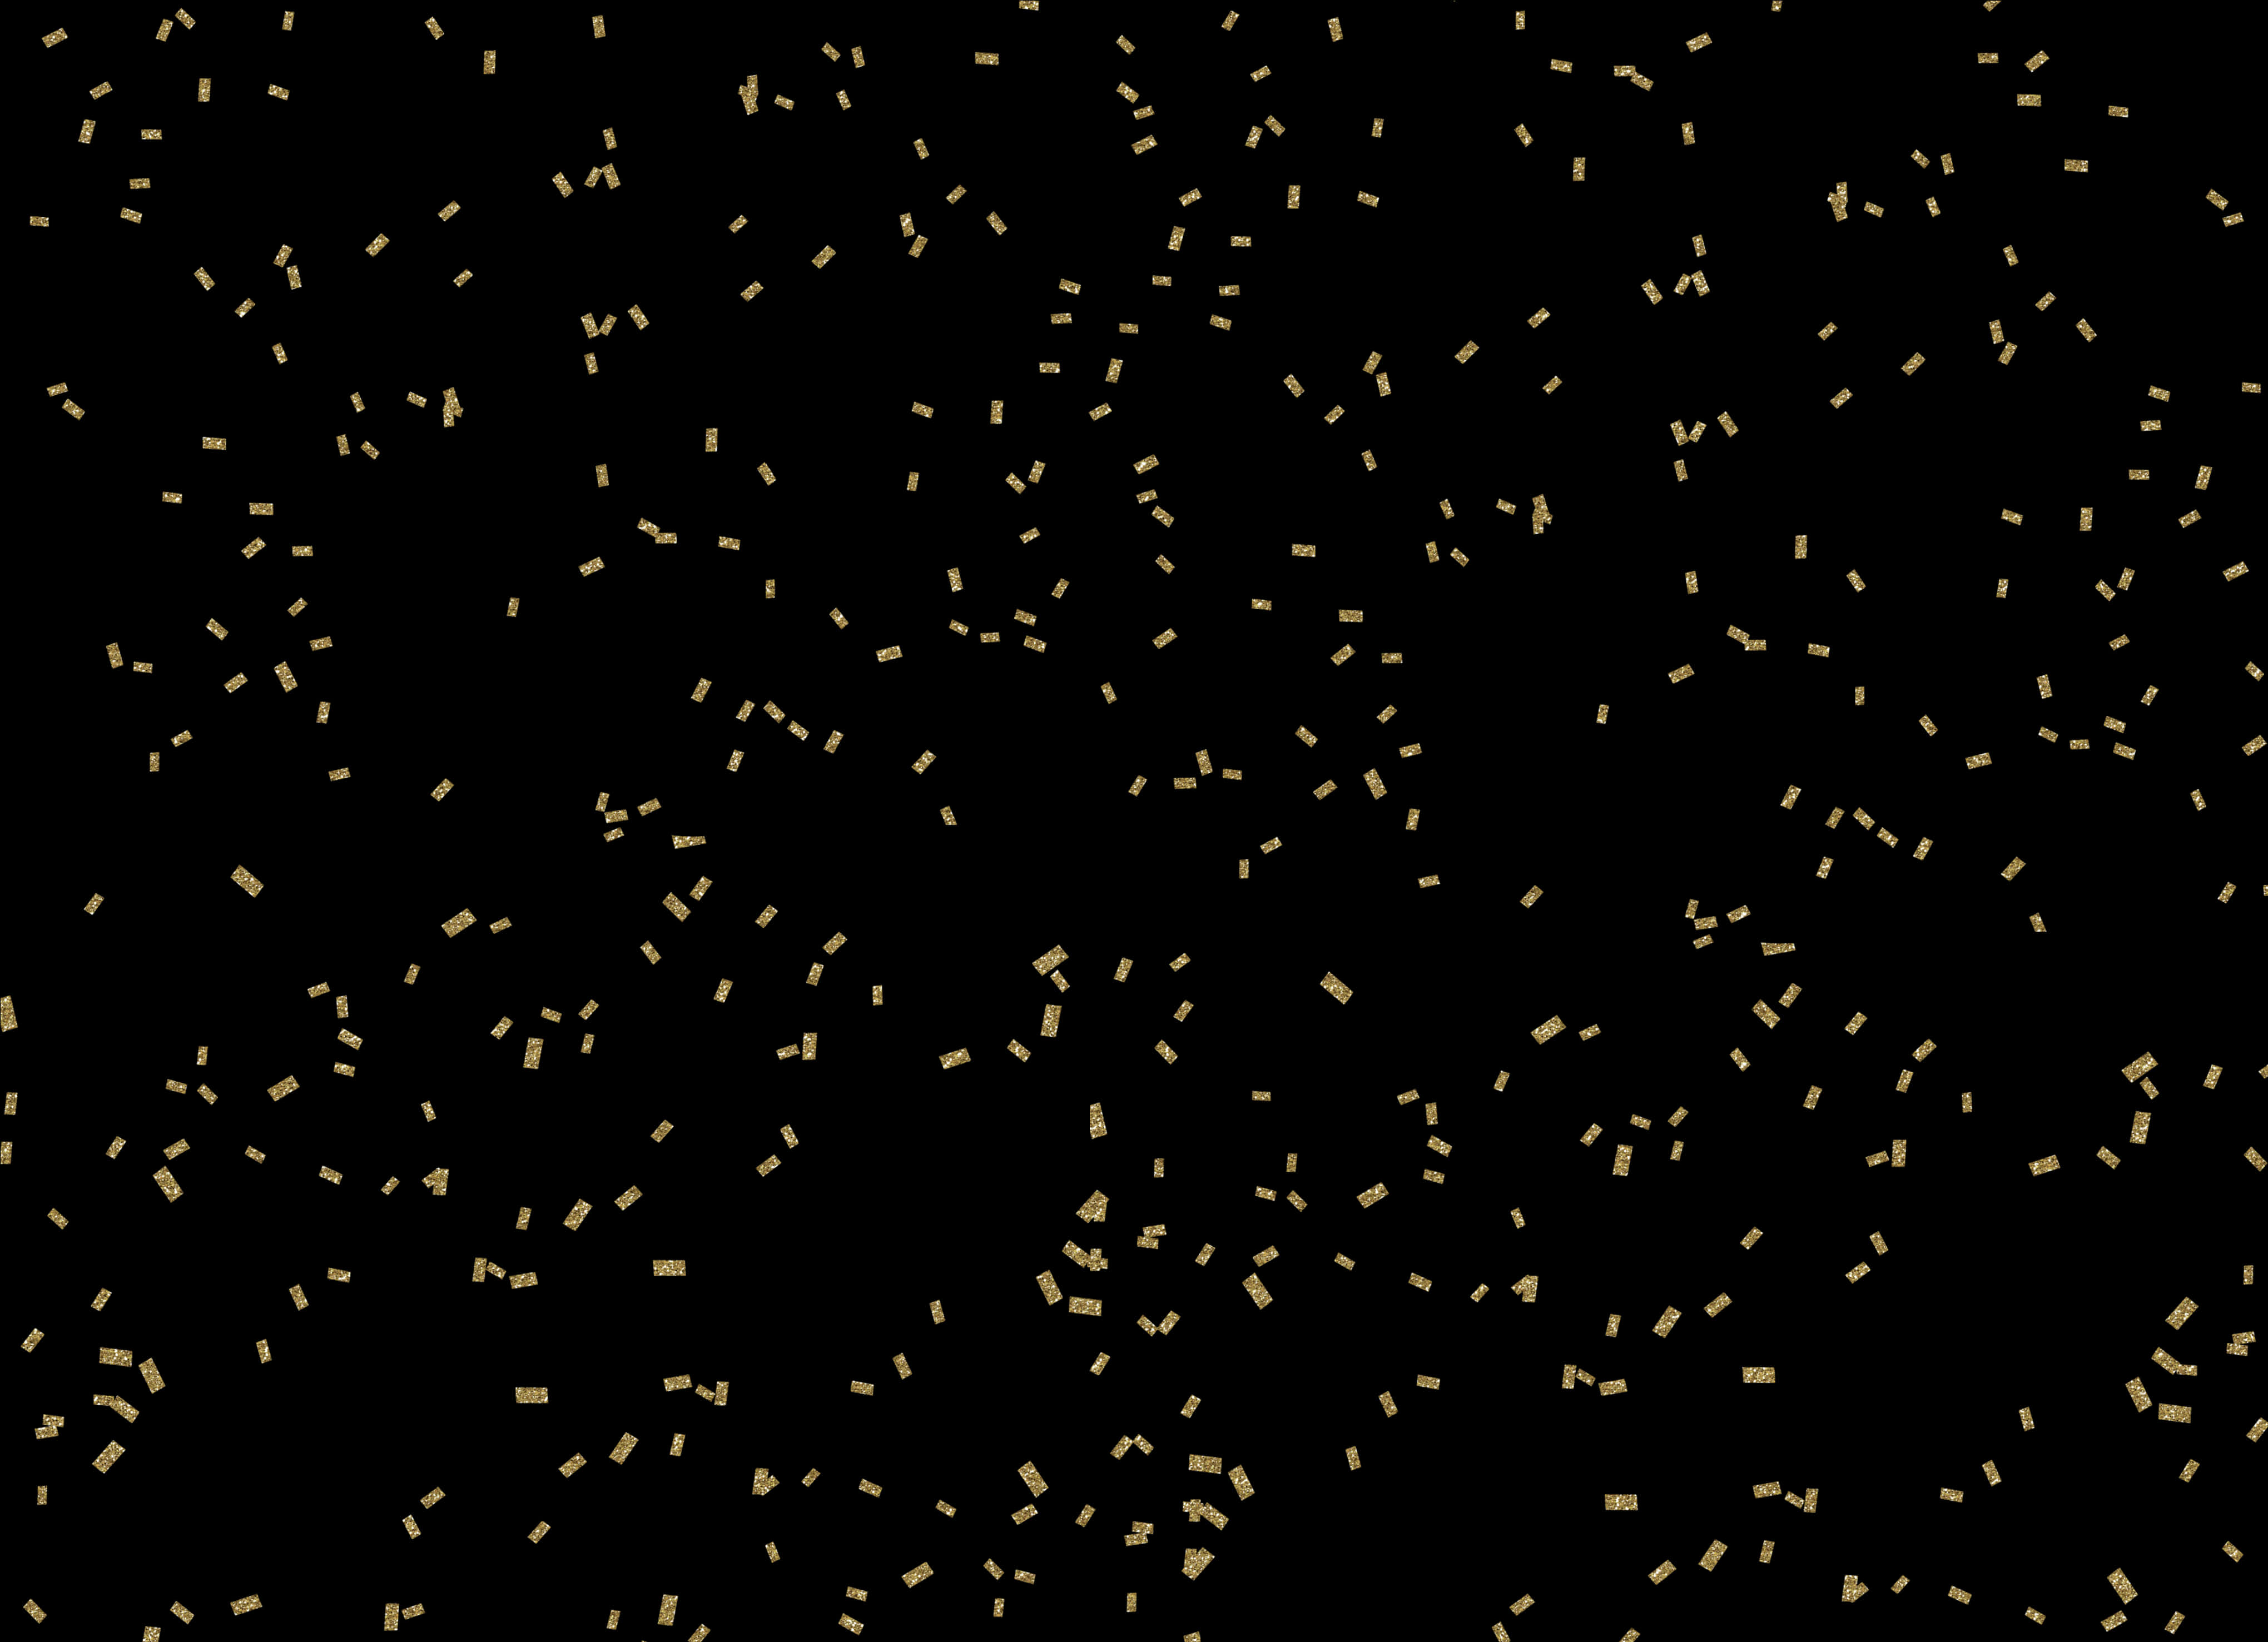 A Black Background With Small Gold Rectangles